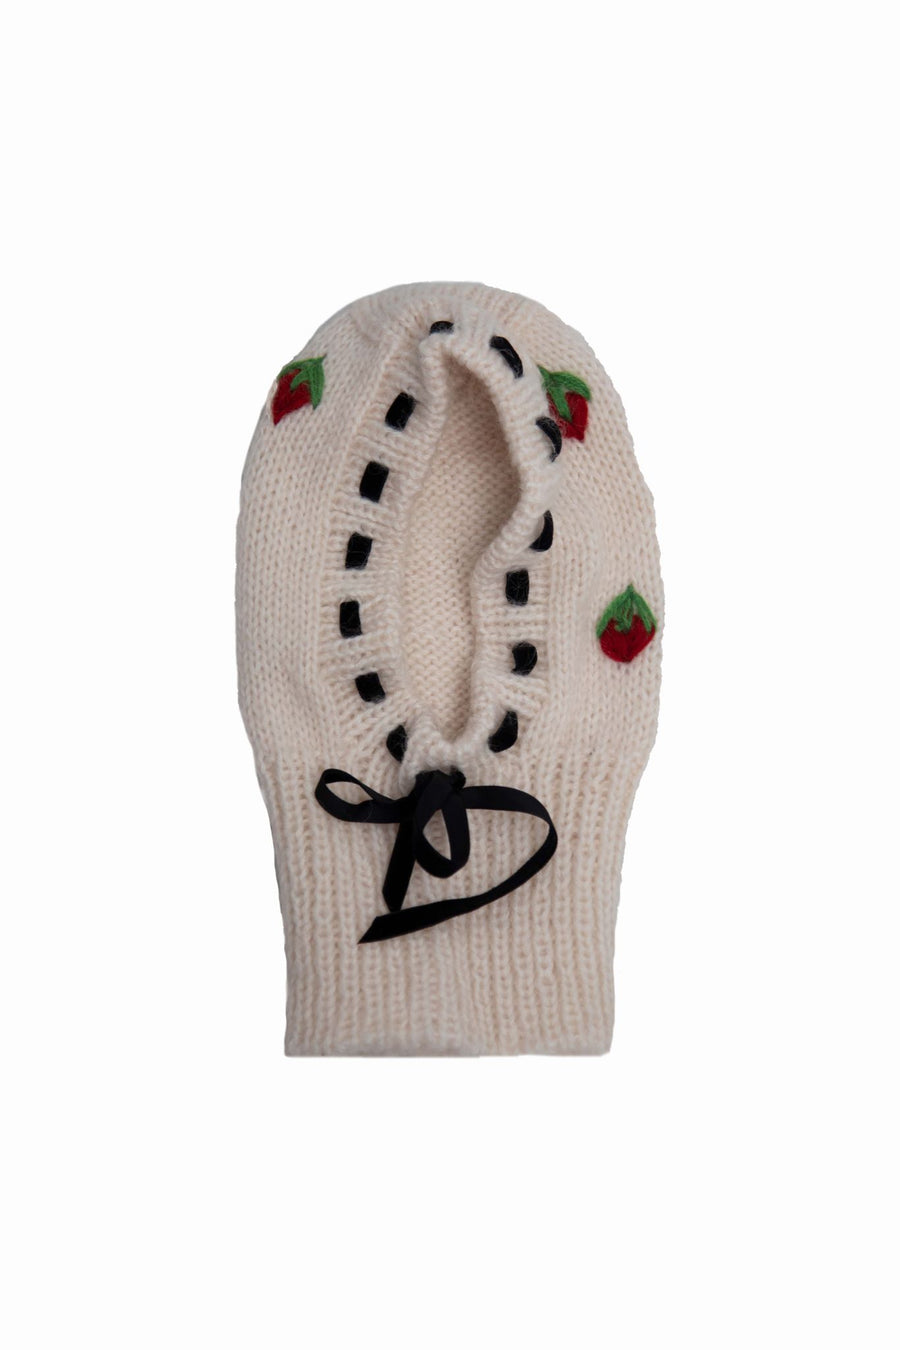 Embroidered Hand Knitted Balaclava